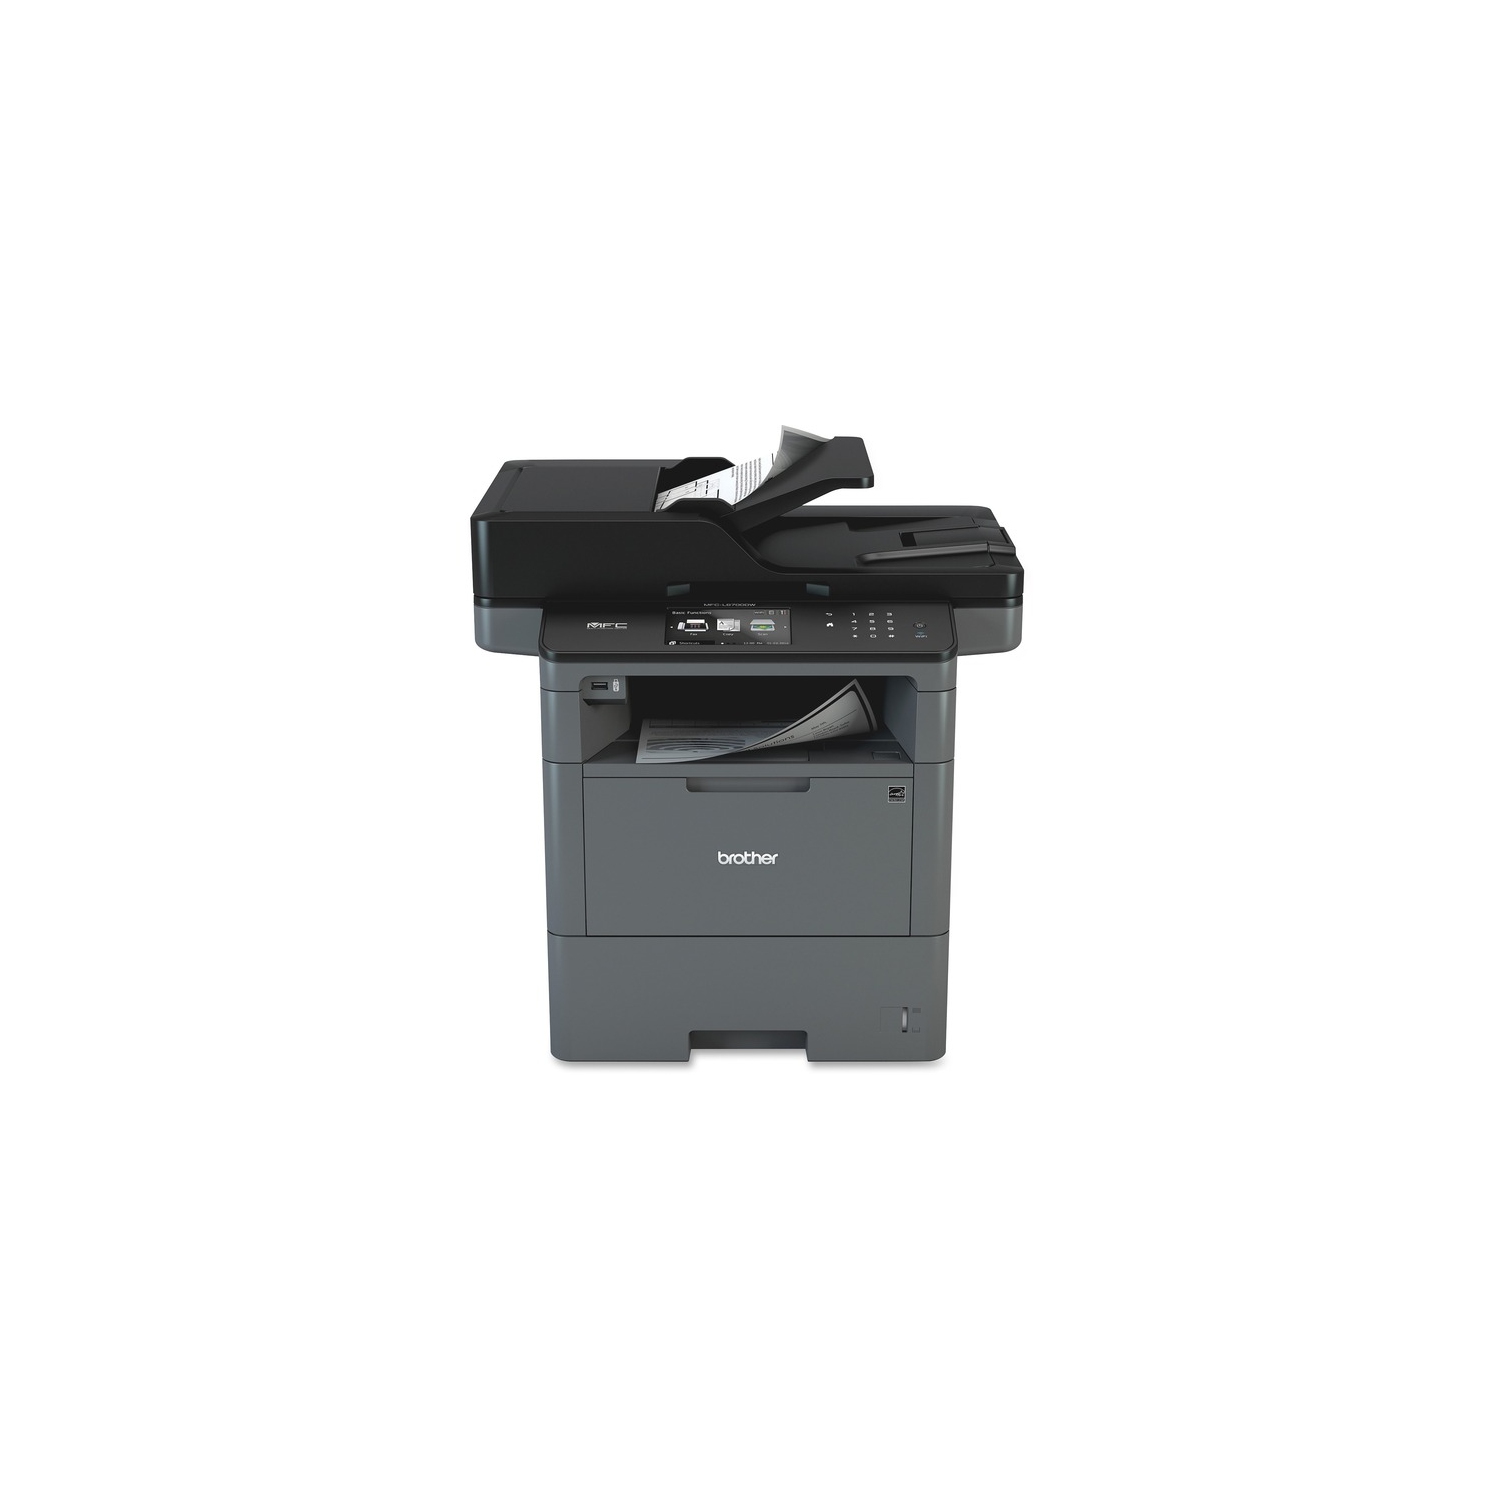 Brother MFC-L6700DW Laser All-in-one Printer MFCL6700DW